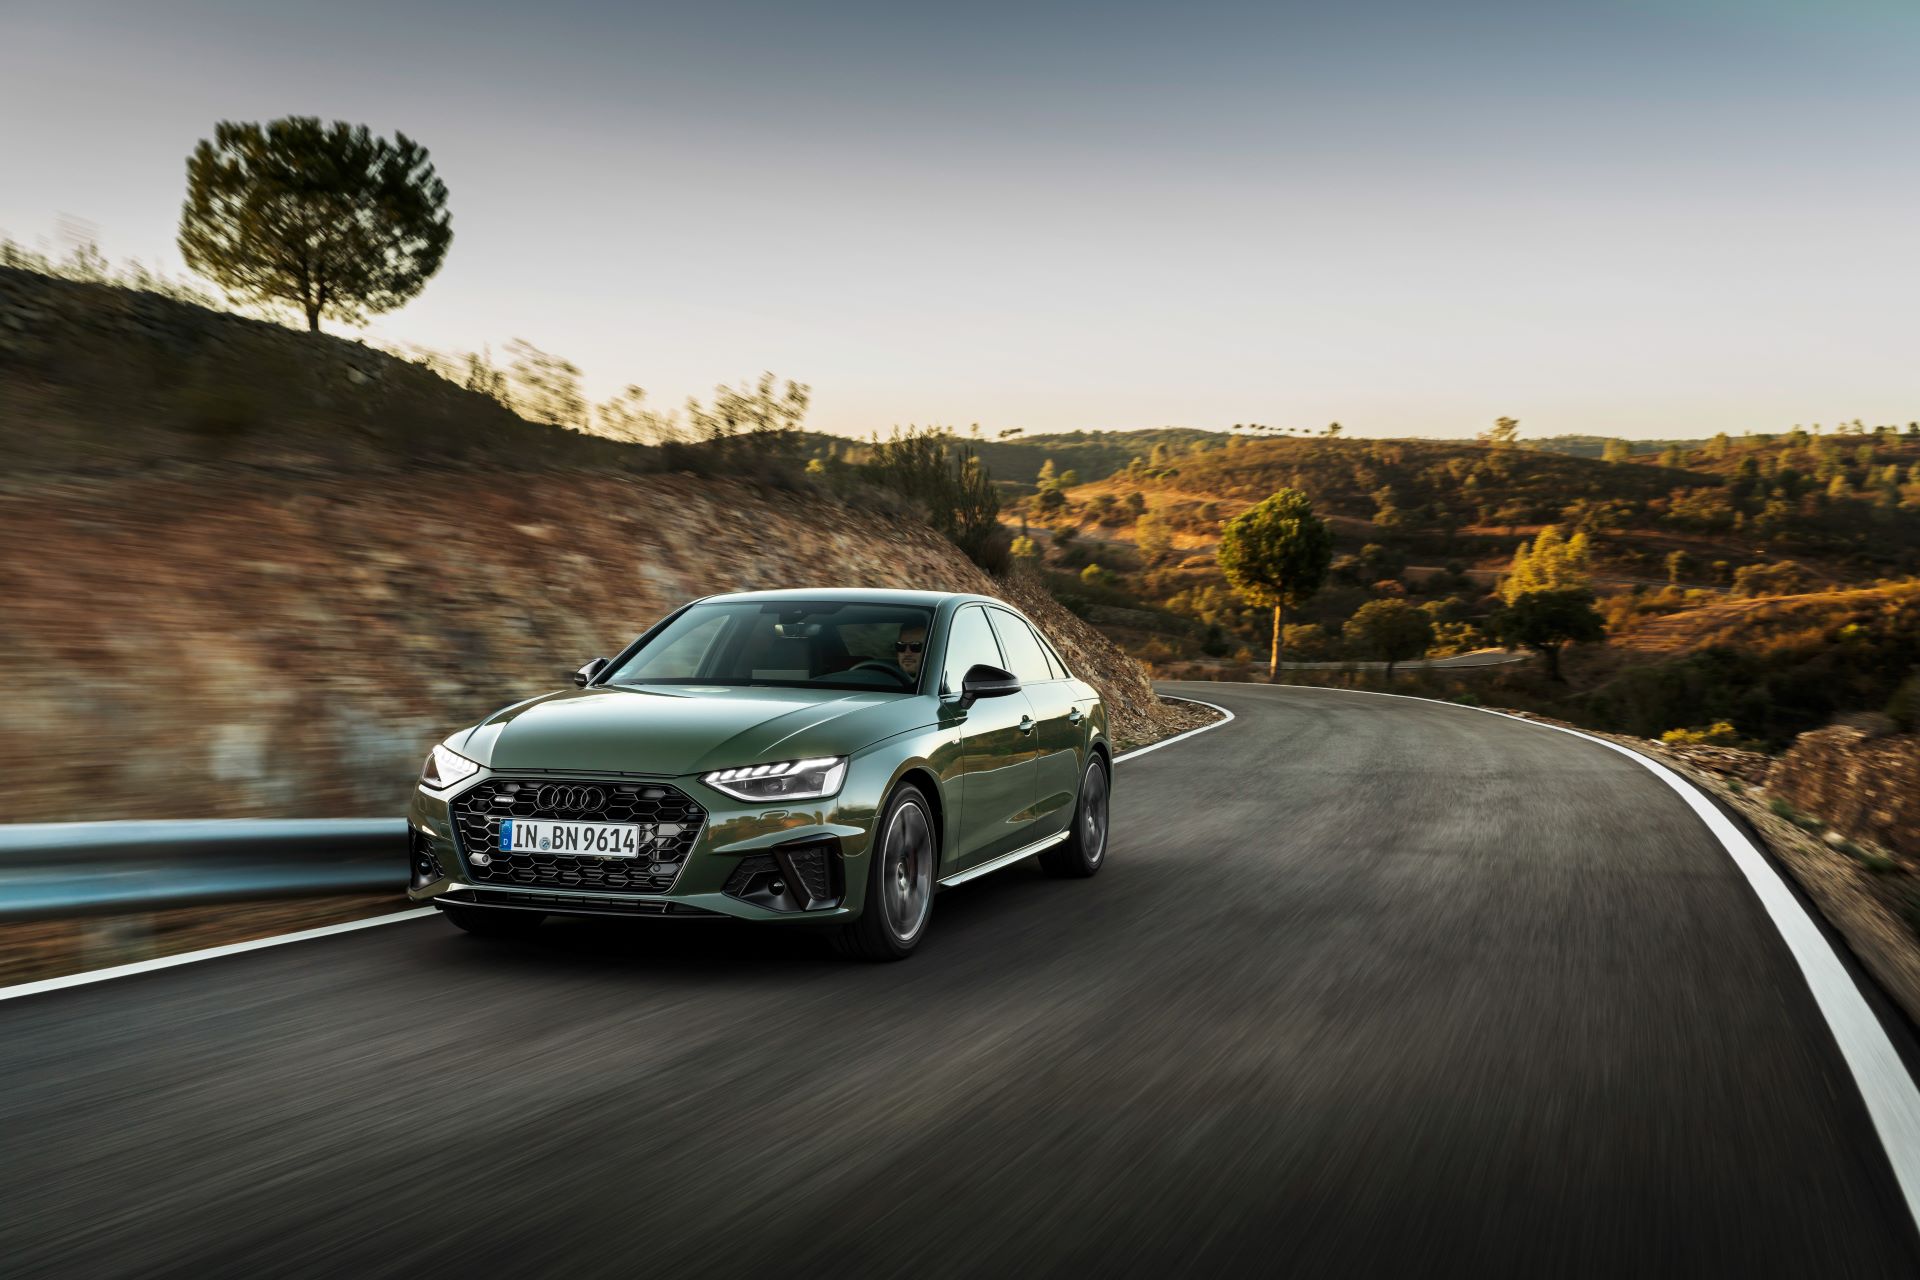 Audi South Africa introduces a range of special-edition models unique to the local market